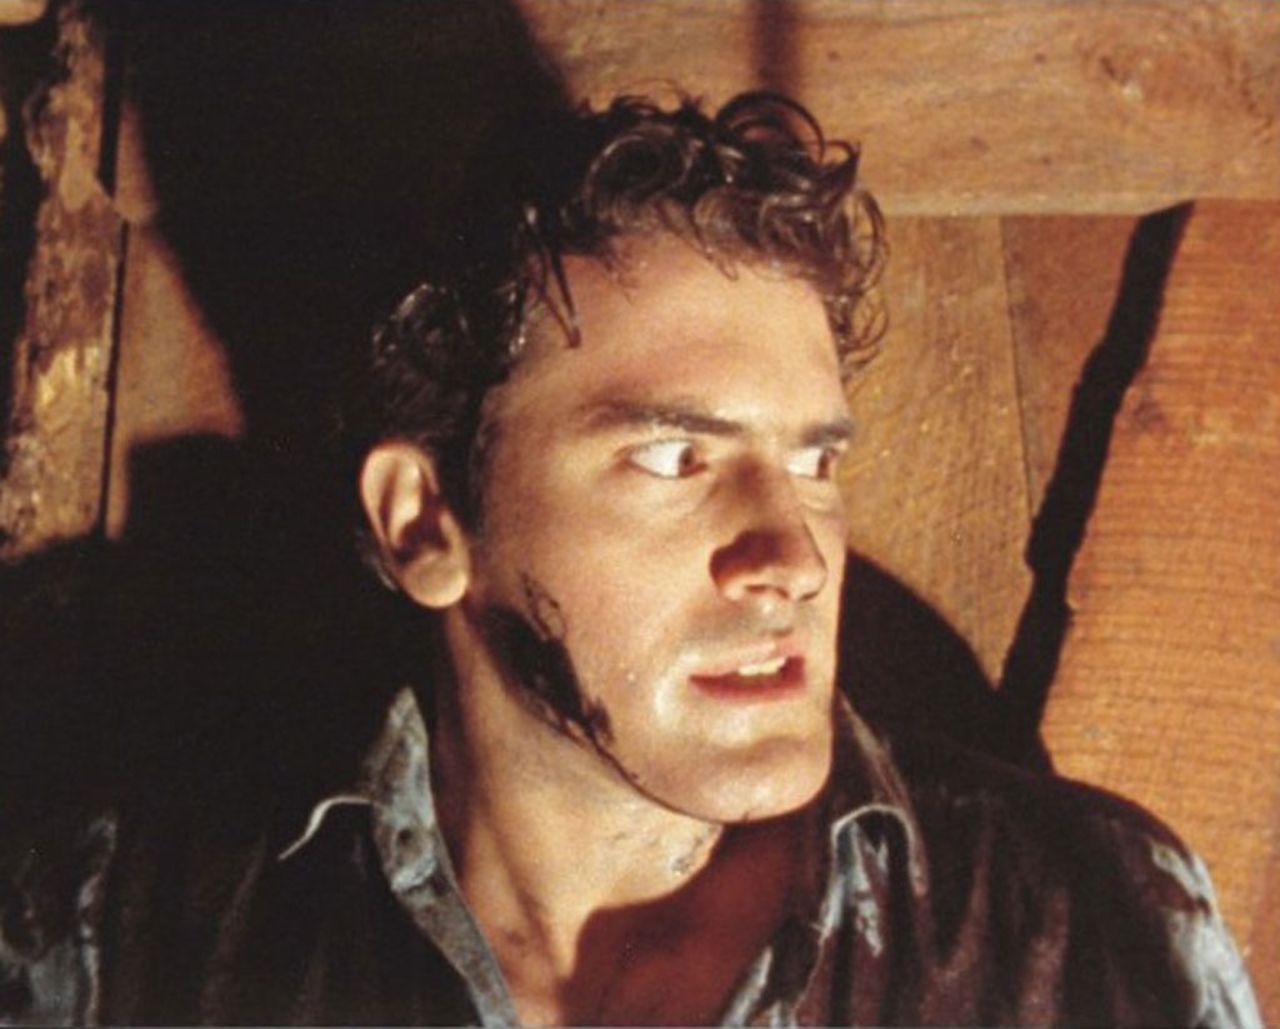 If you think Hollywood's sequel fever can only be found at the movies, turn on your TV. Starz has announced that it's taking the classic horror franchise "The Evil Dead" and spinning it into a TV series that will see Bruce Campbell reprise his role of Ash Williams. This small screen project is just one of many that's been ripped from the movies.